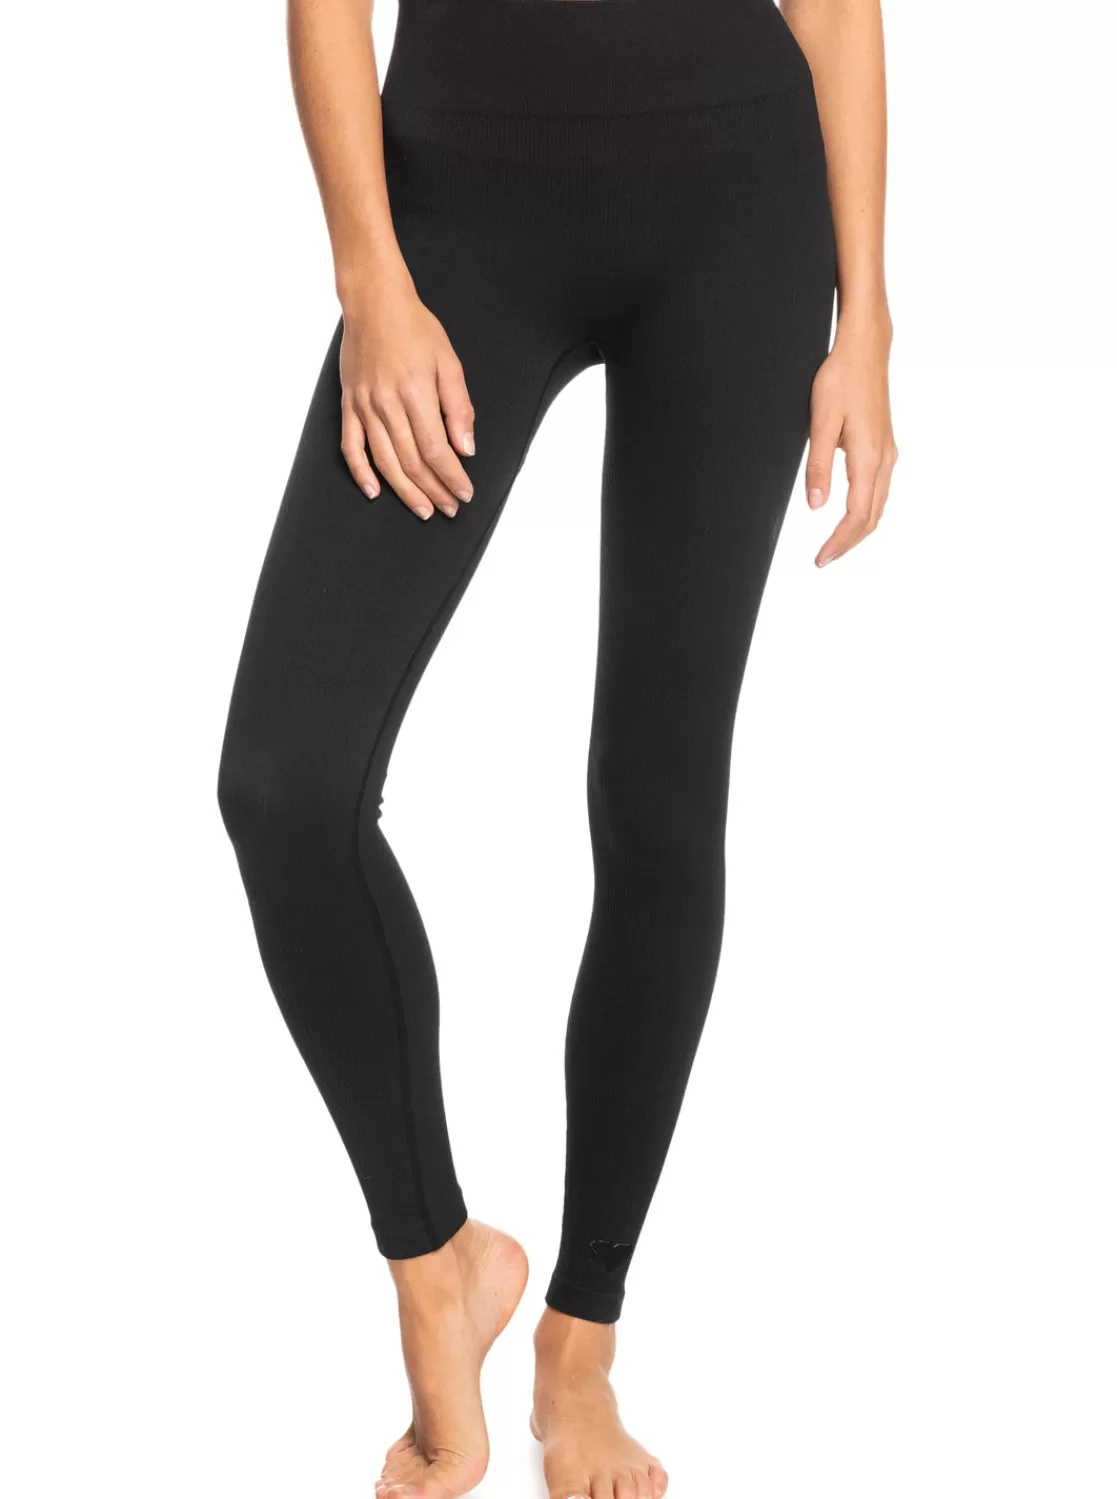 Chill Out Seamless Technical Leggings-ROXY Fashion